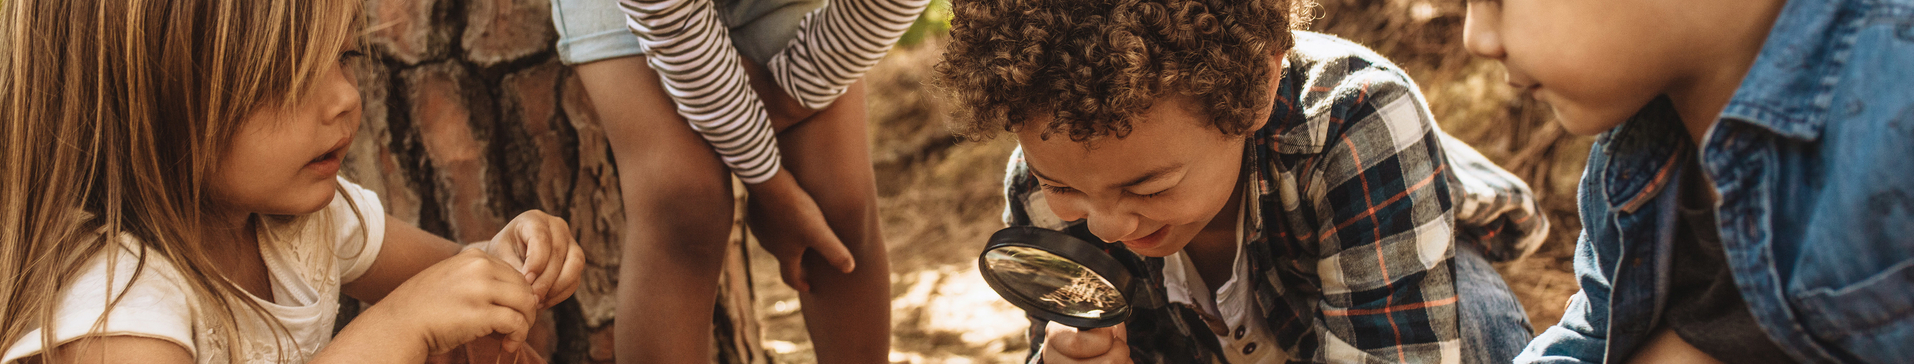 Kids exploring in forest with a magnifying glass